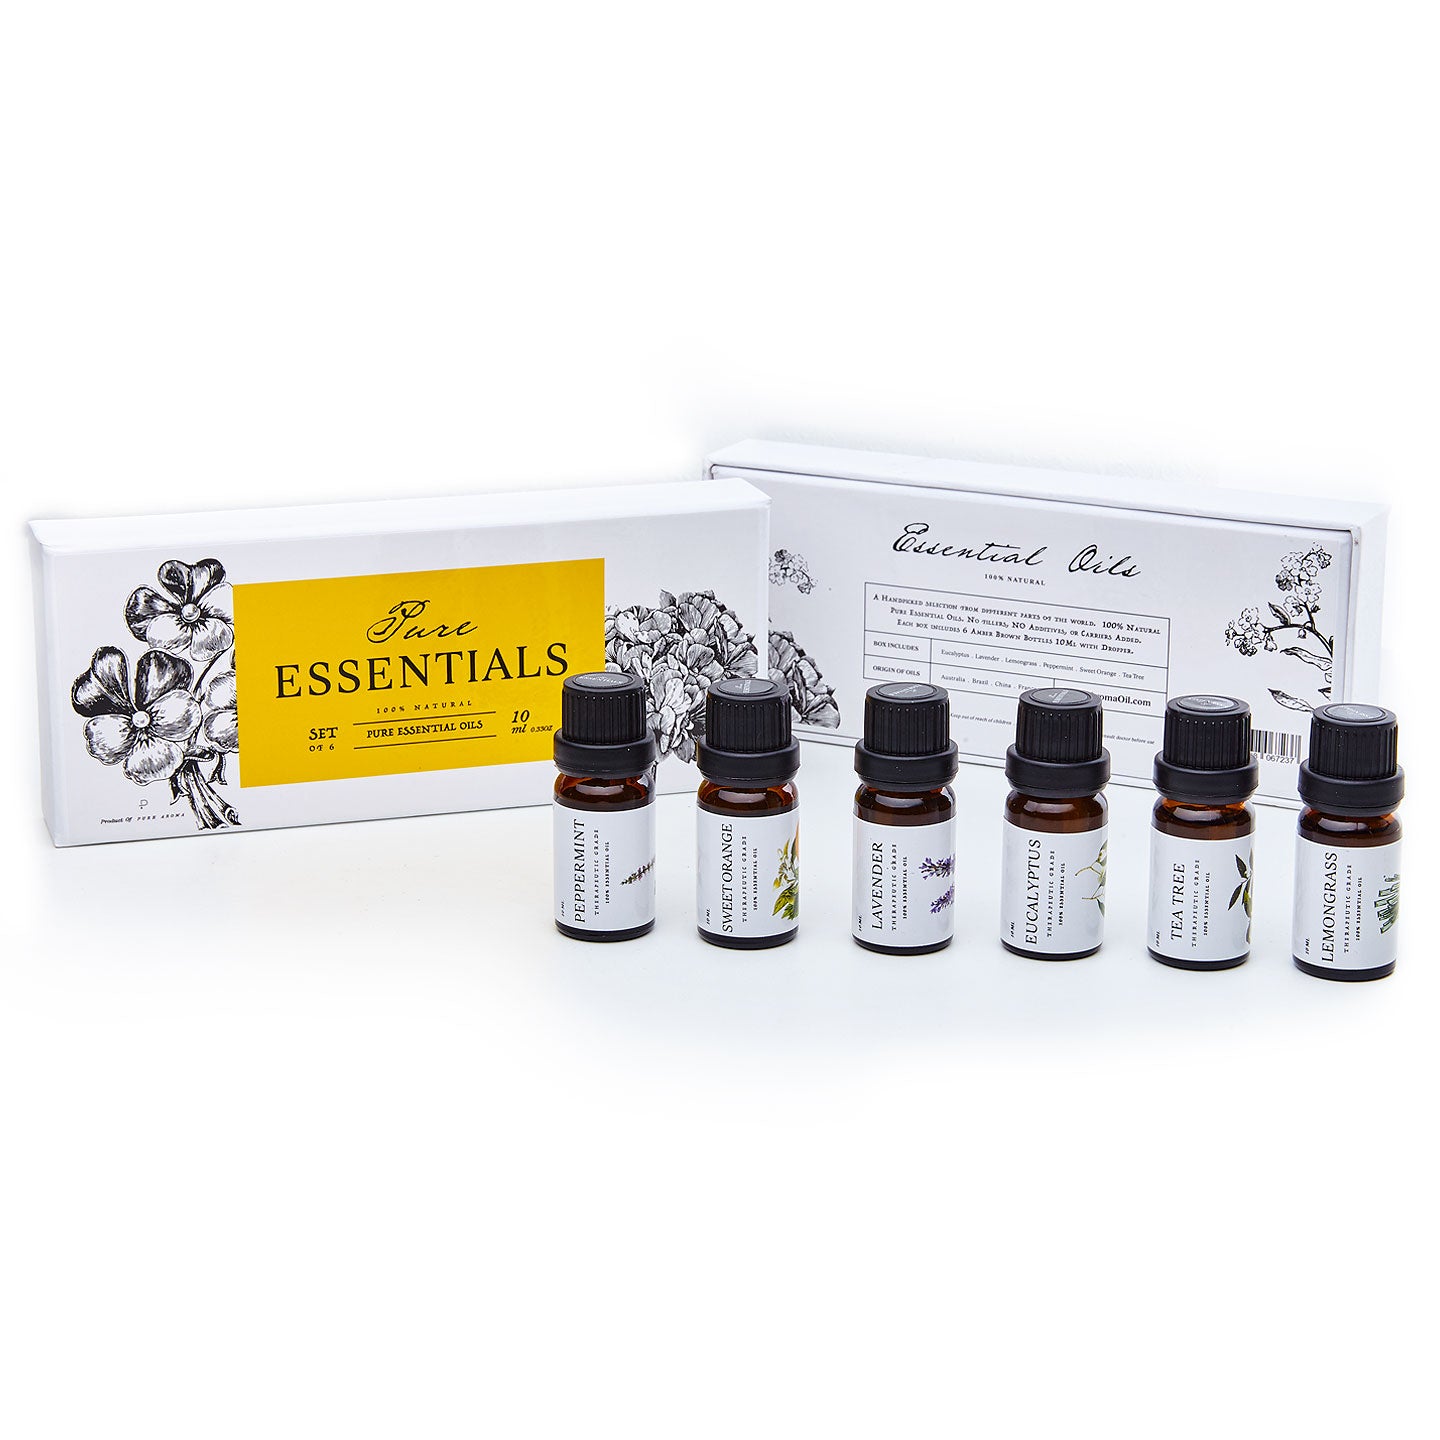 Onepure Aromatherapy Essential Oils Gift Set, 6 Bottles/ 10ml each